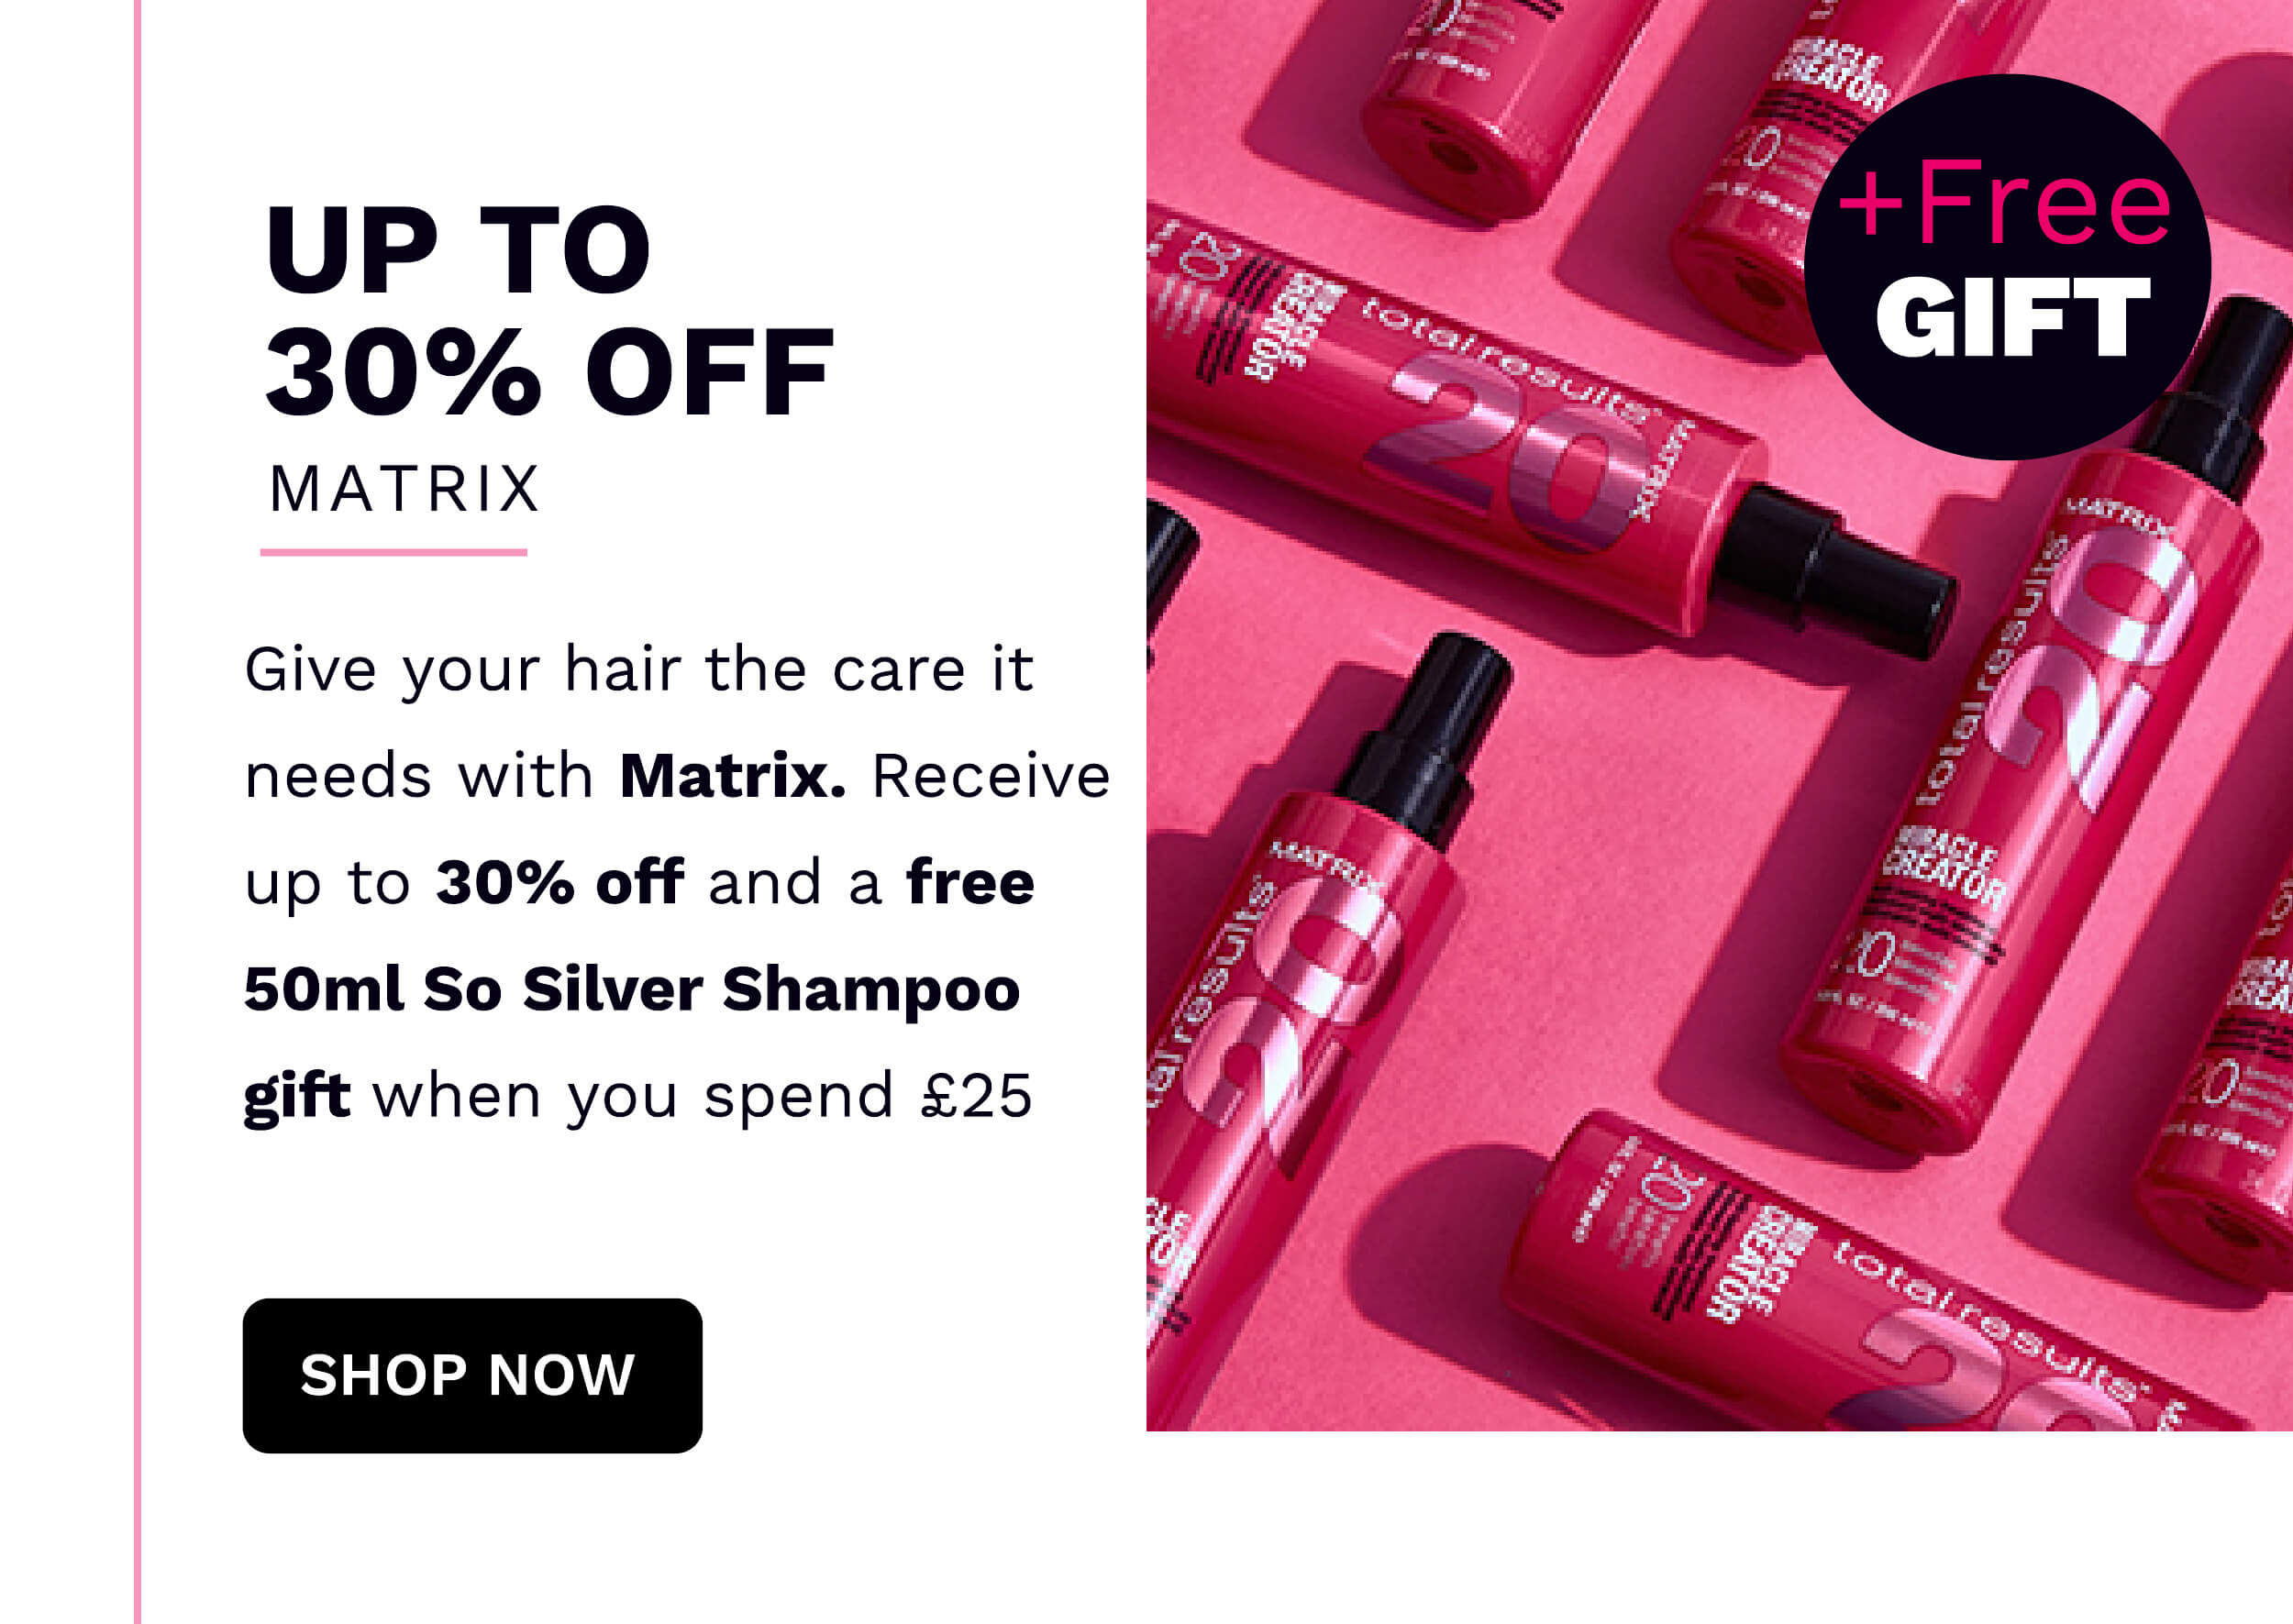 UP TO 30% OFF MATRIC + FREE GIFT